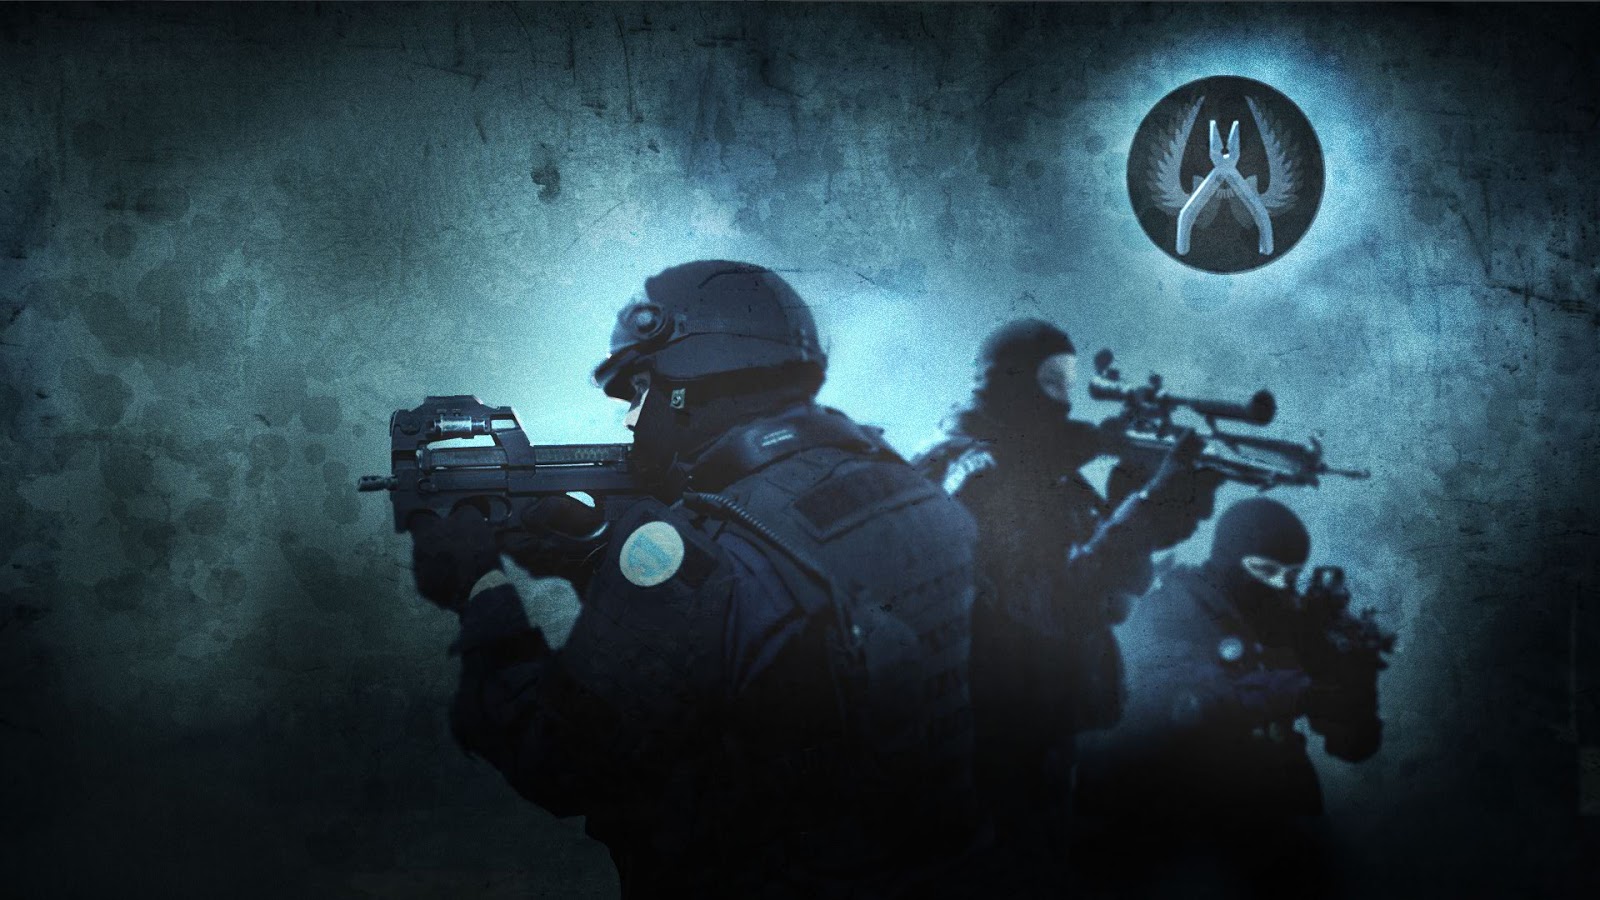 cs go wallpapers,personal protective equipment,airsoft,soldier,swat,darkness